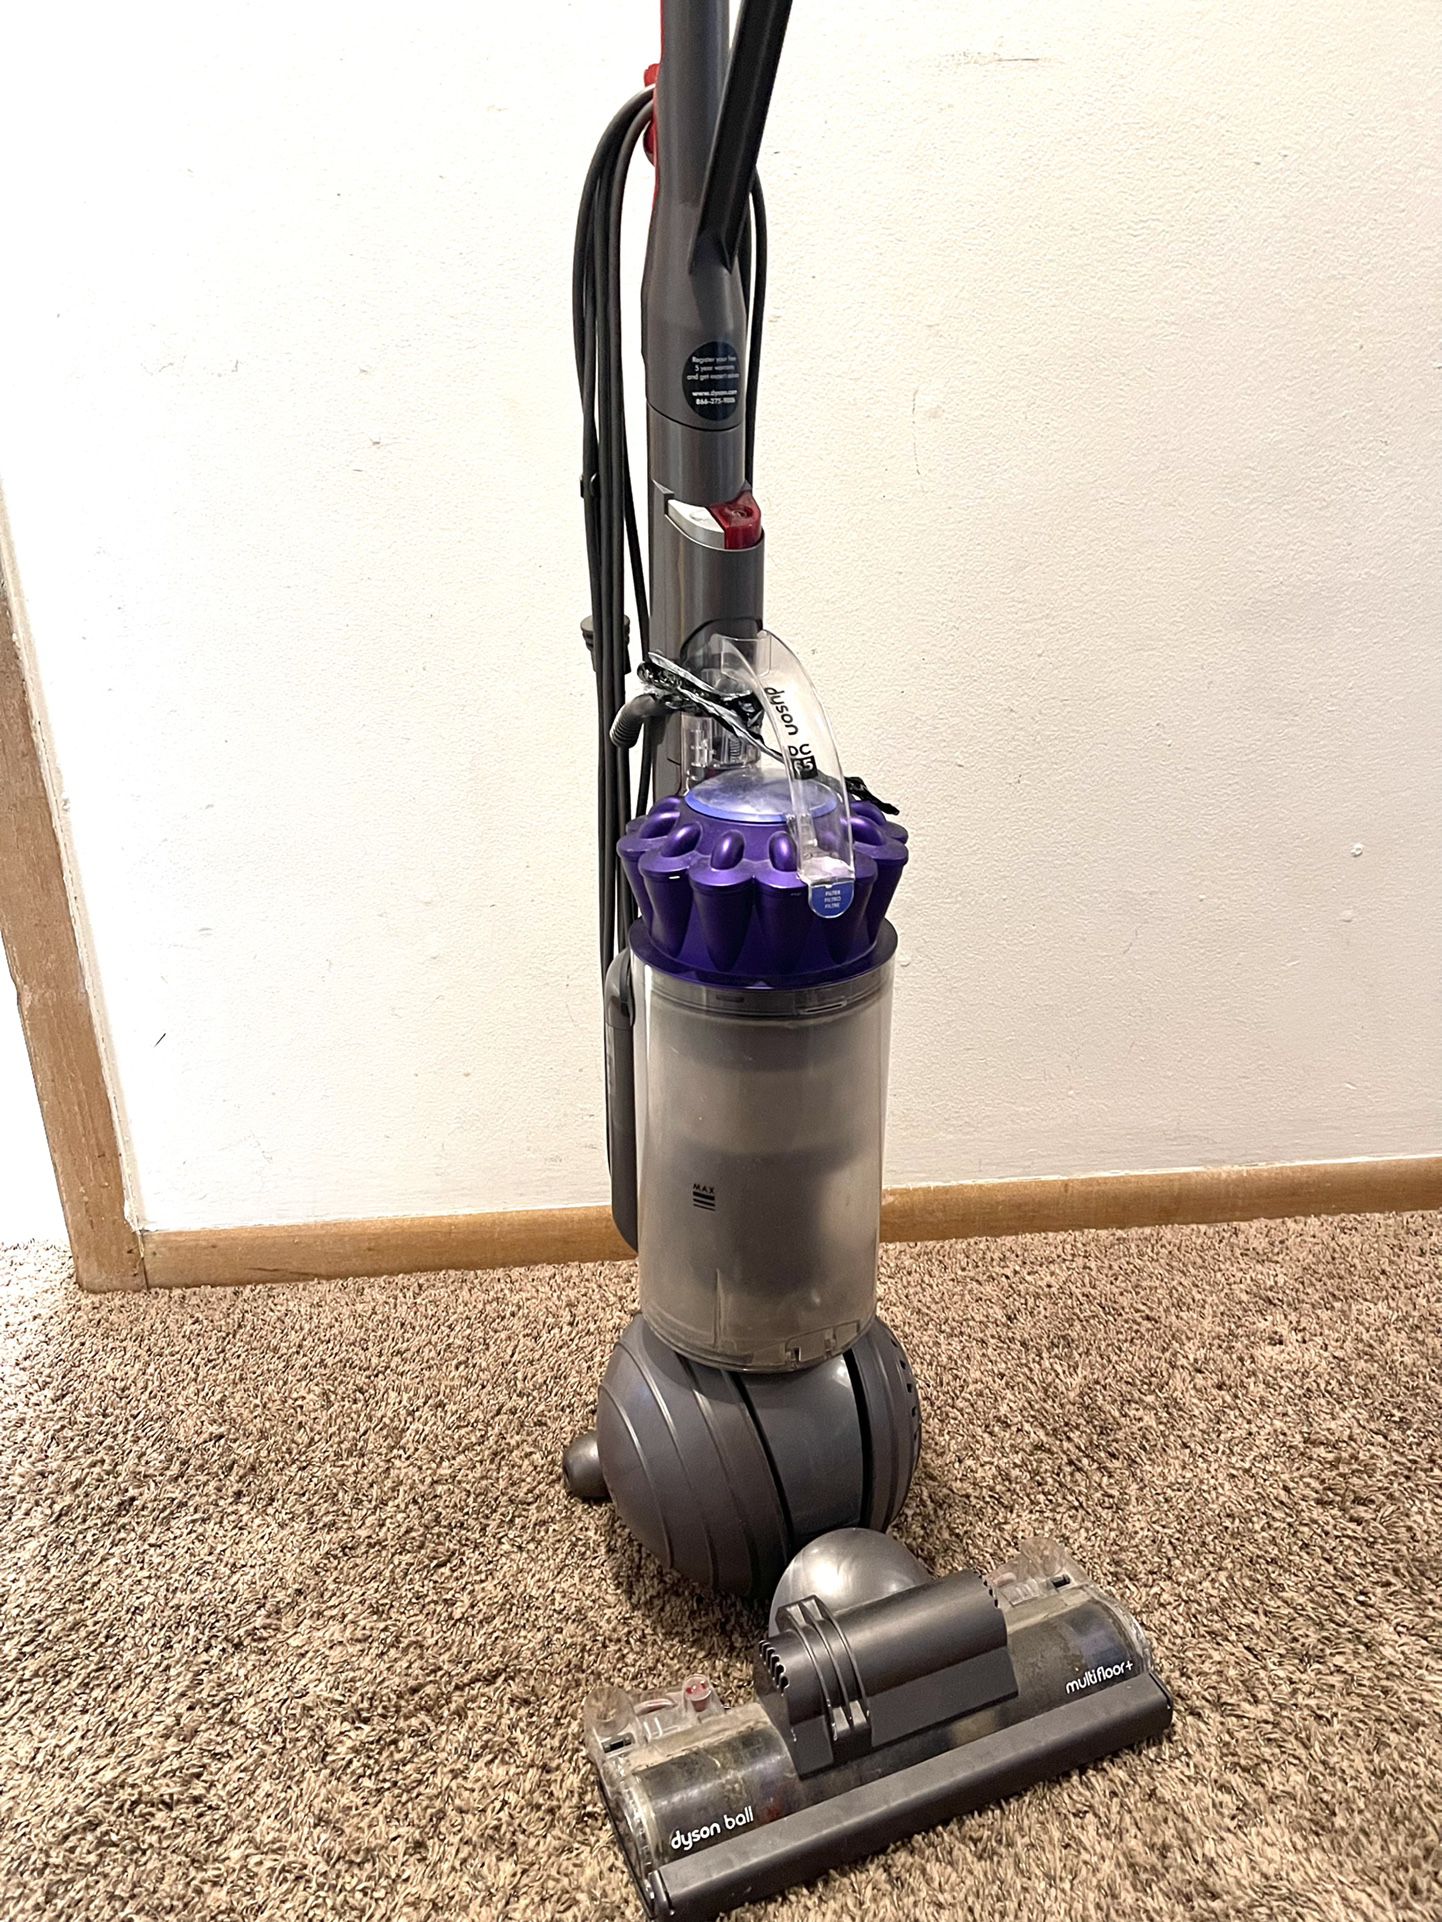 Dyson vacuum. Selling Because My Kids Broke A Plastic Piece That Holds The Trash Bin. I Have To Use Tape Told The Bin